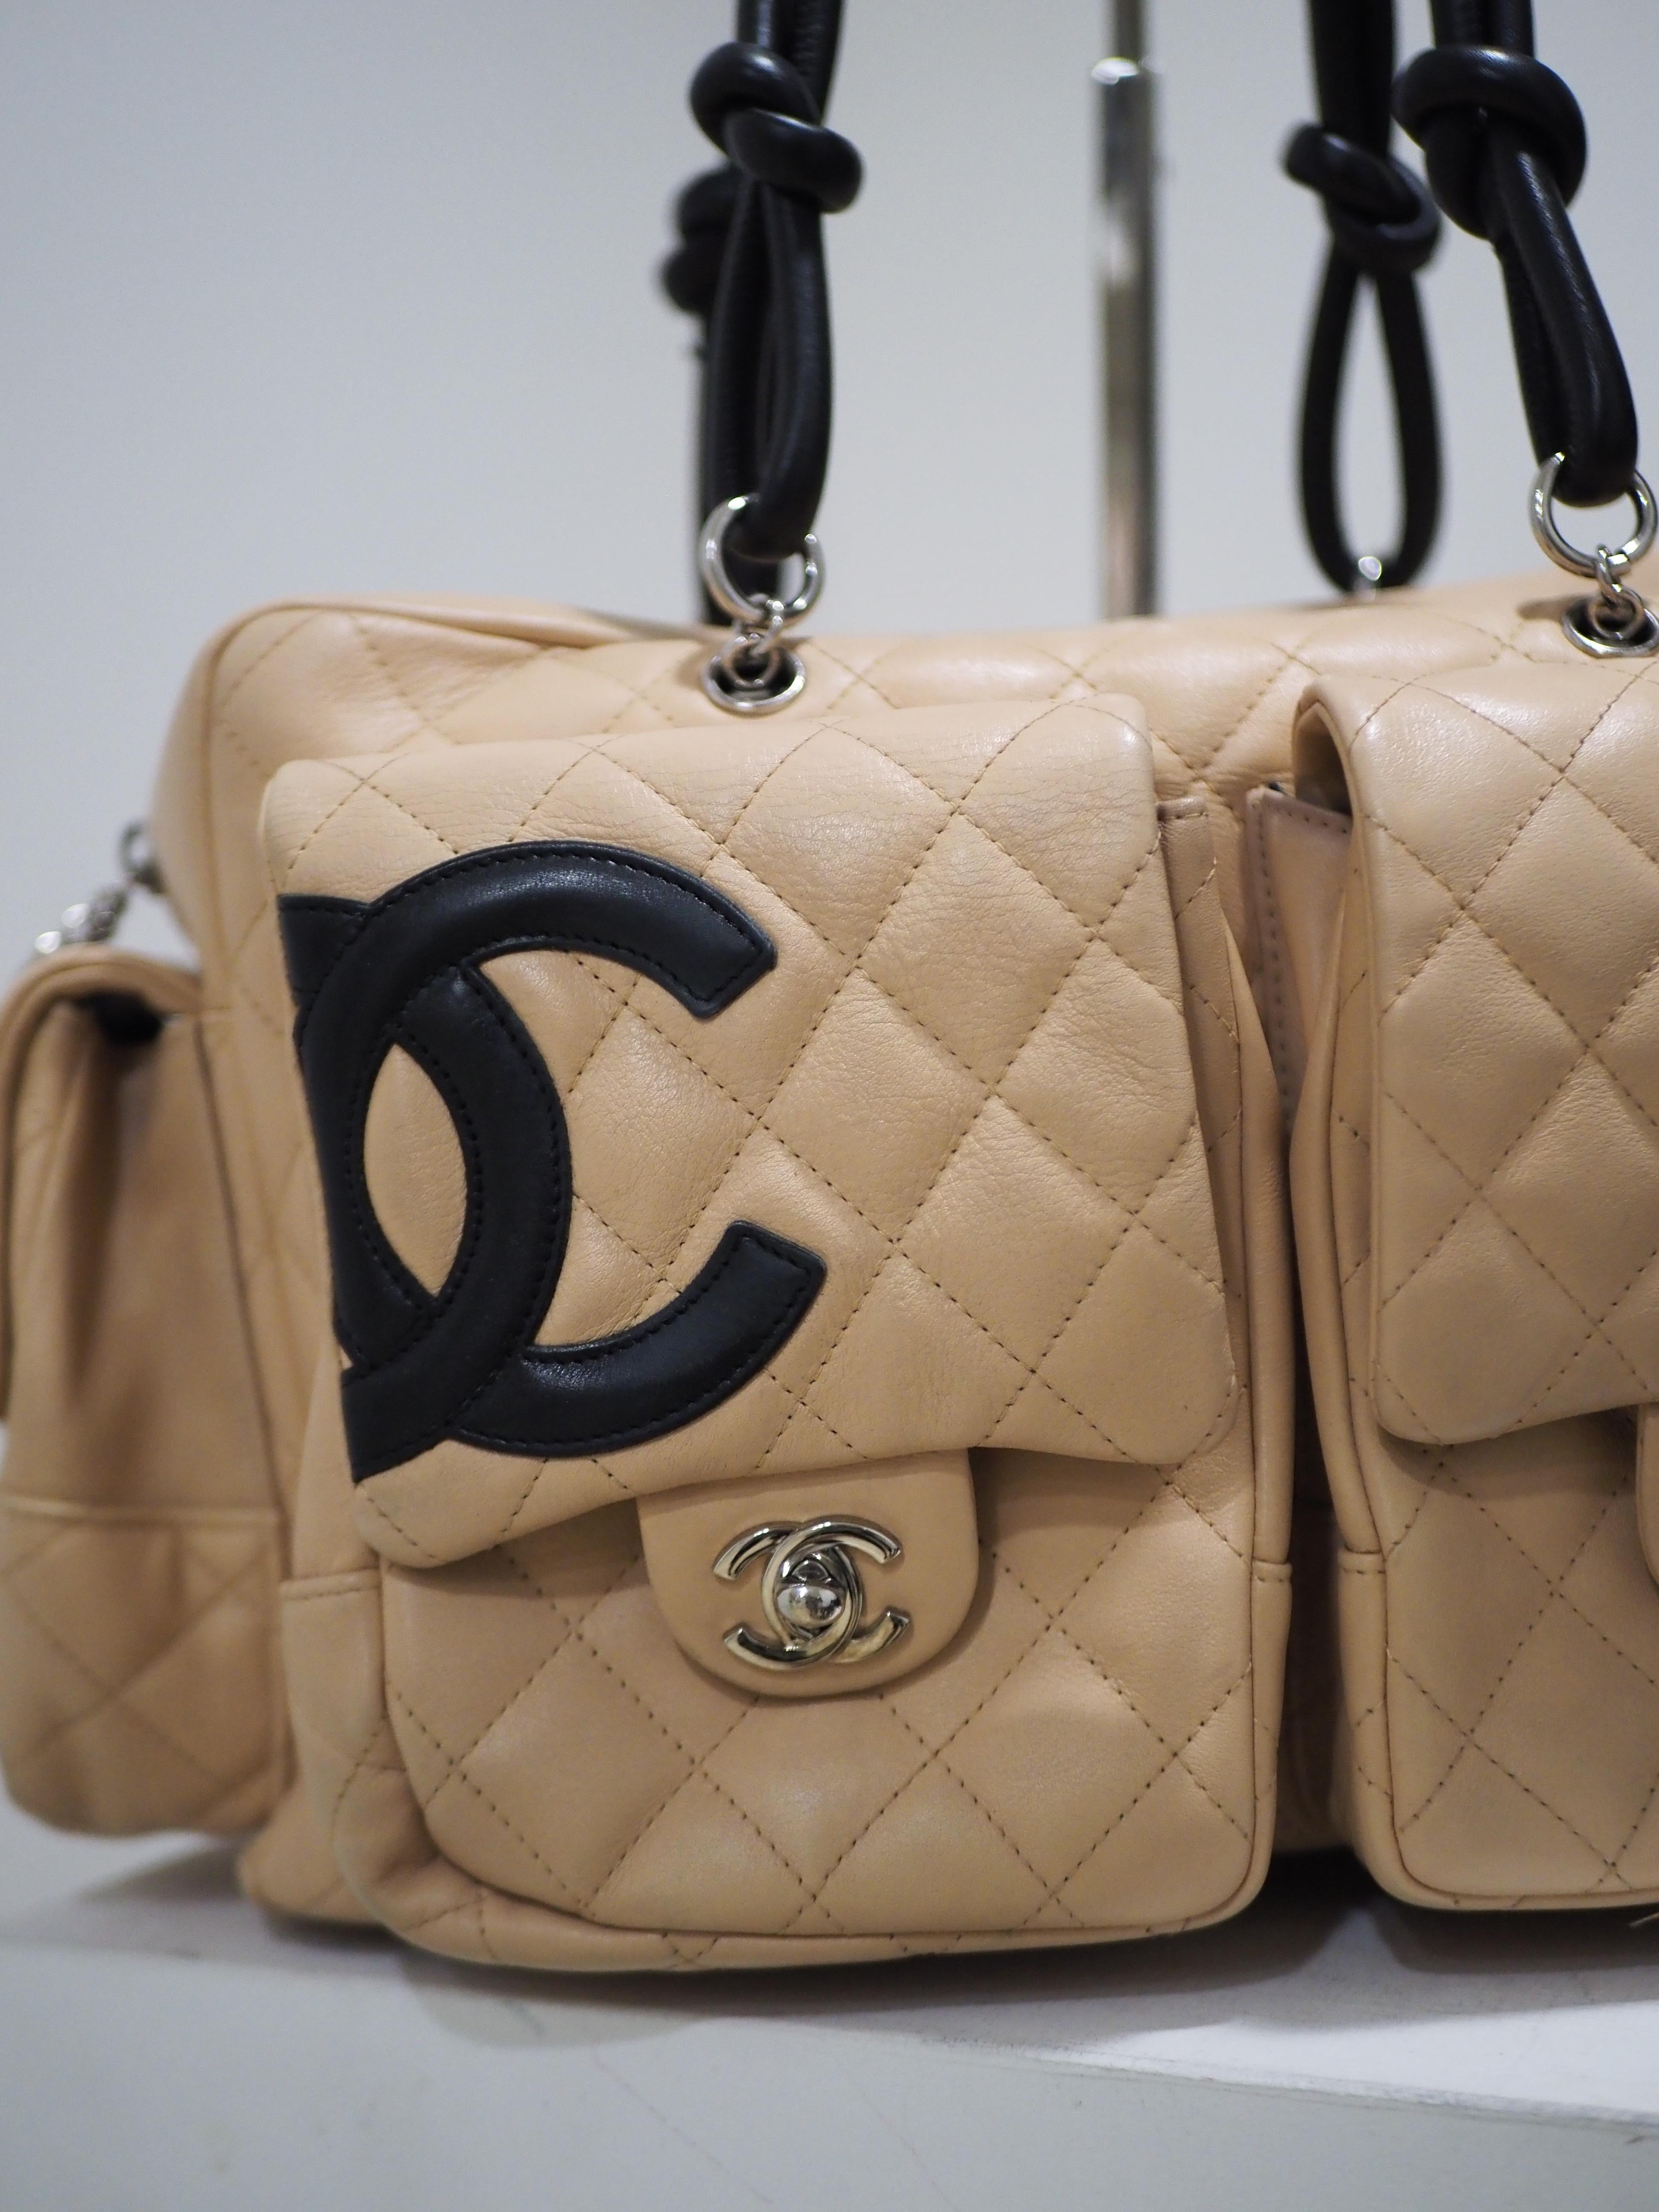 Chanel CC camel and black leather handbag shoulder bag
inside lining is not in good conditions

